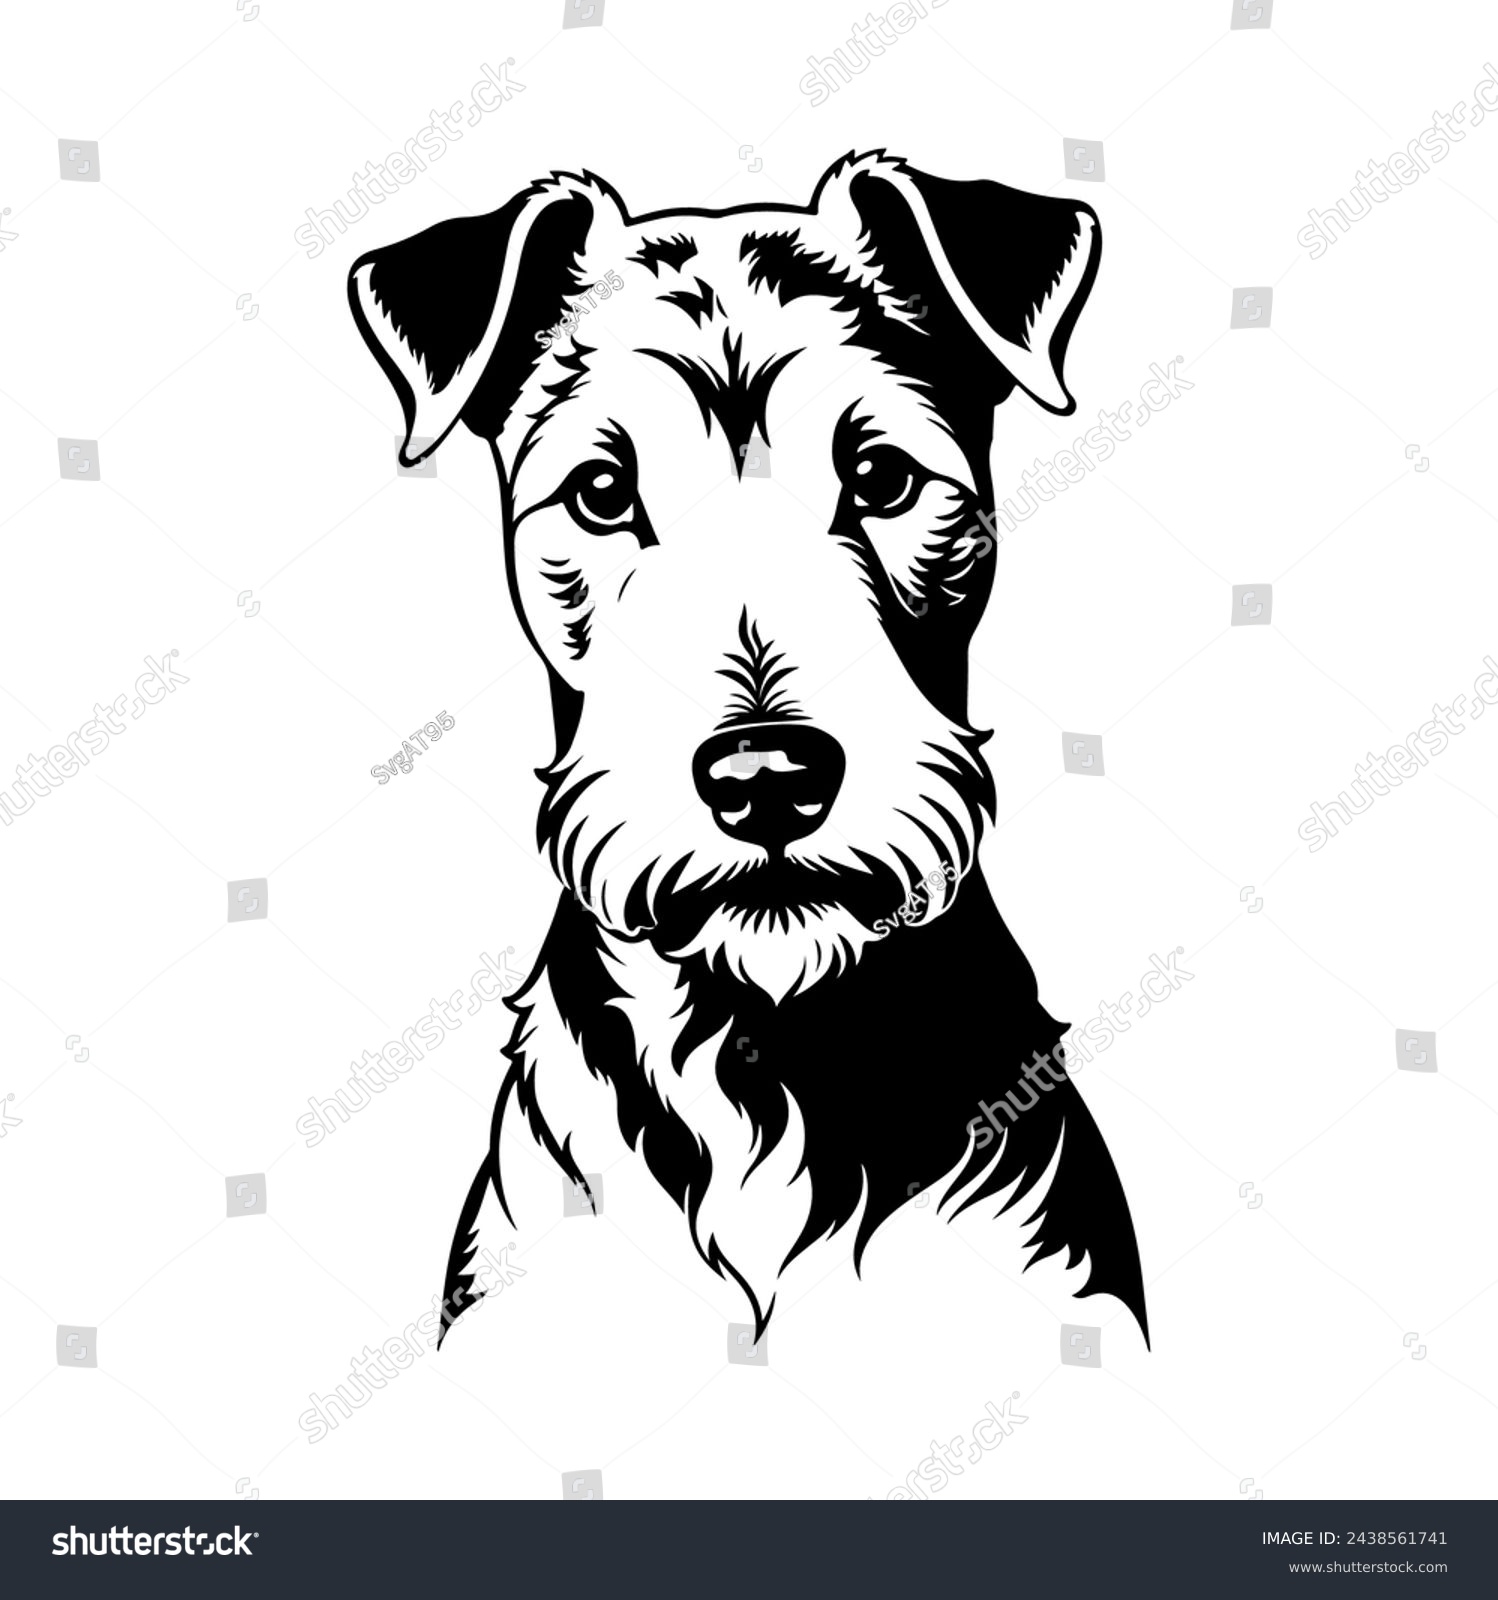 SVG of Portrait of a Lakeland Terrier Dog Vector isolated on white background, Dog Silhouettes. svg